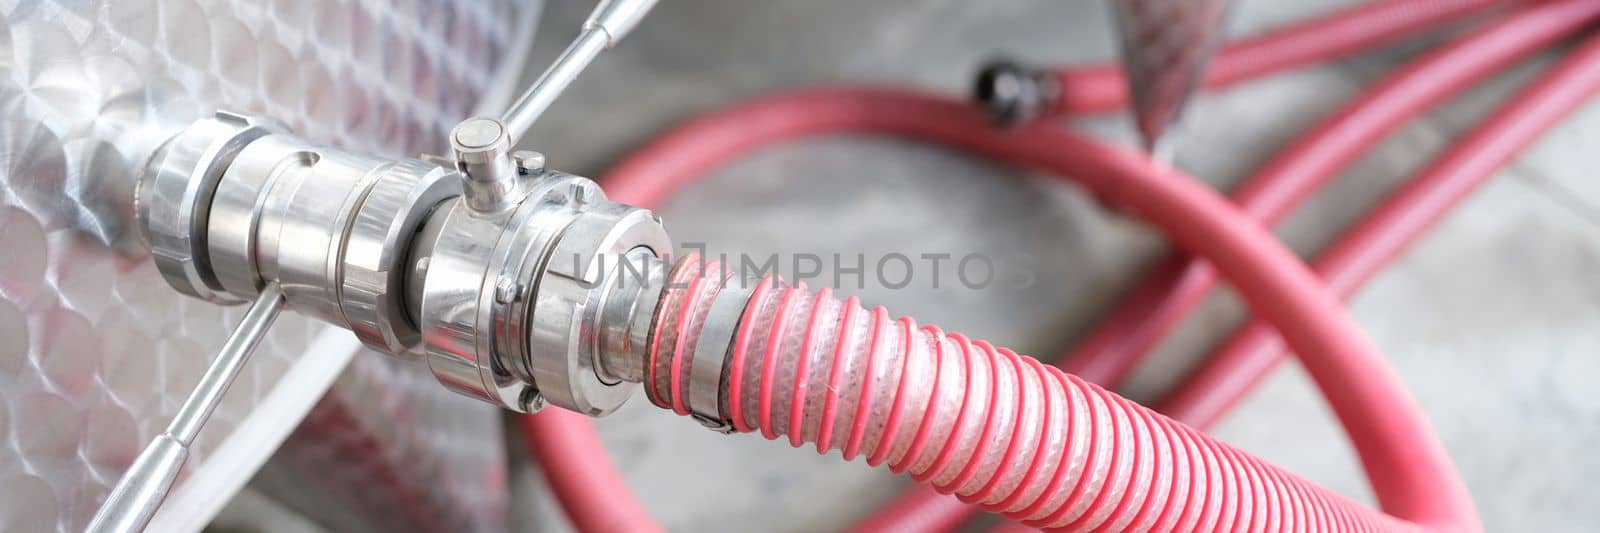 Stainless steel piping system with ball valves and hose by kuprevich